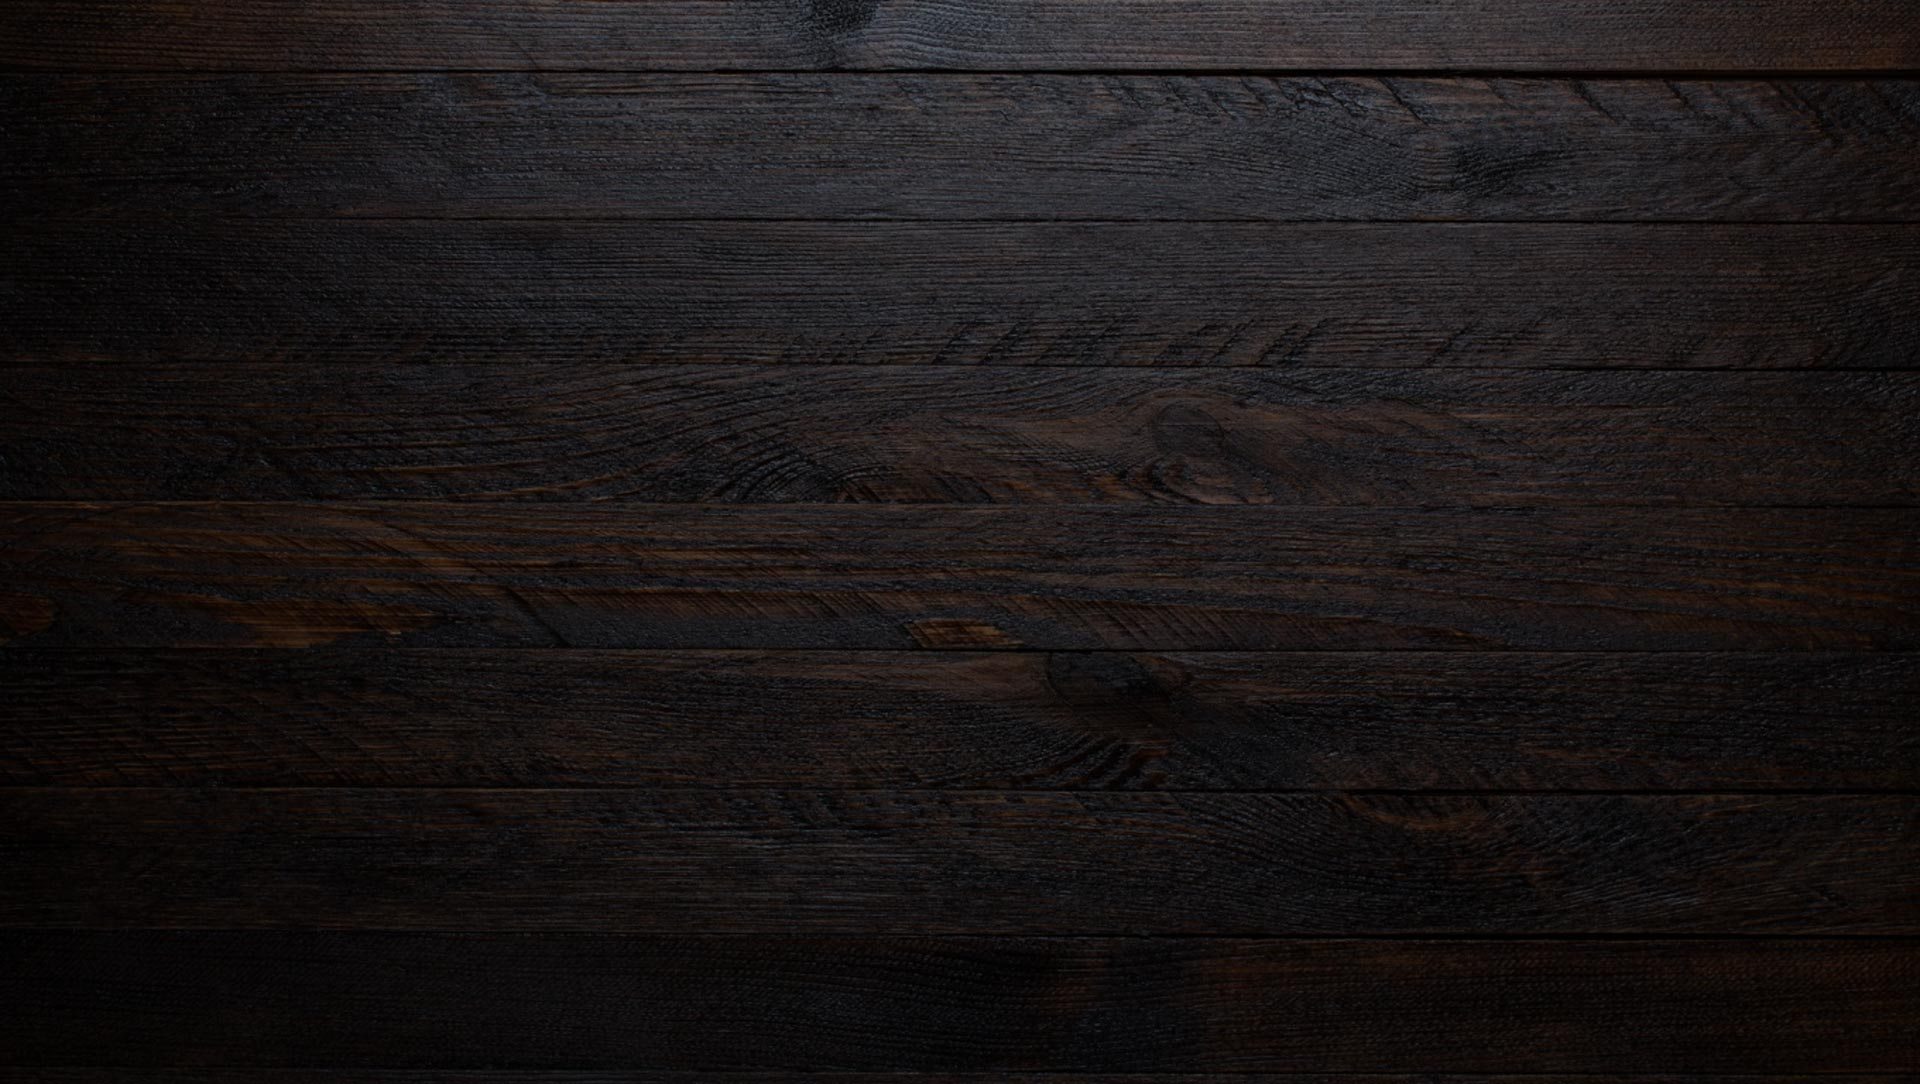 Dark Wood Texture HD Background  FREE Vector Design  Cdr Ai EPS PNG  SVG